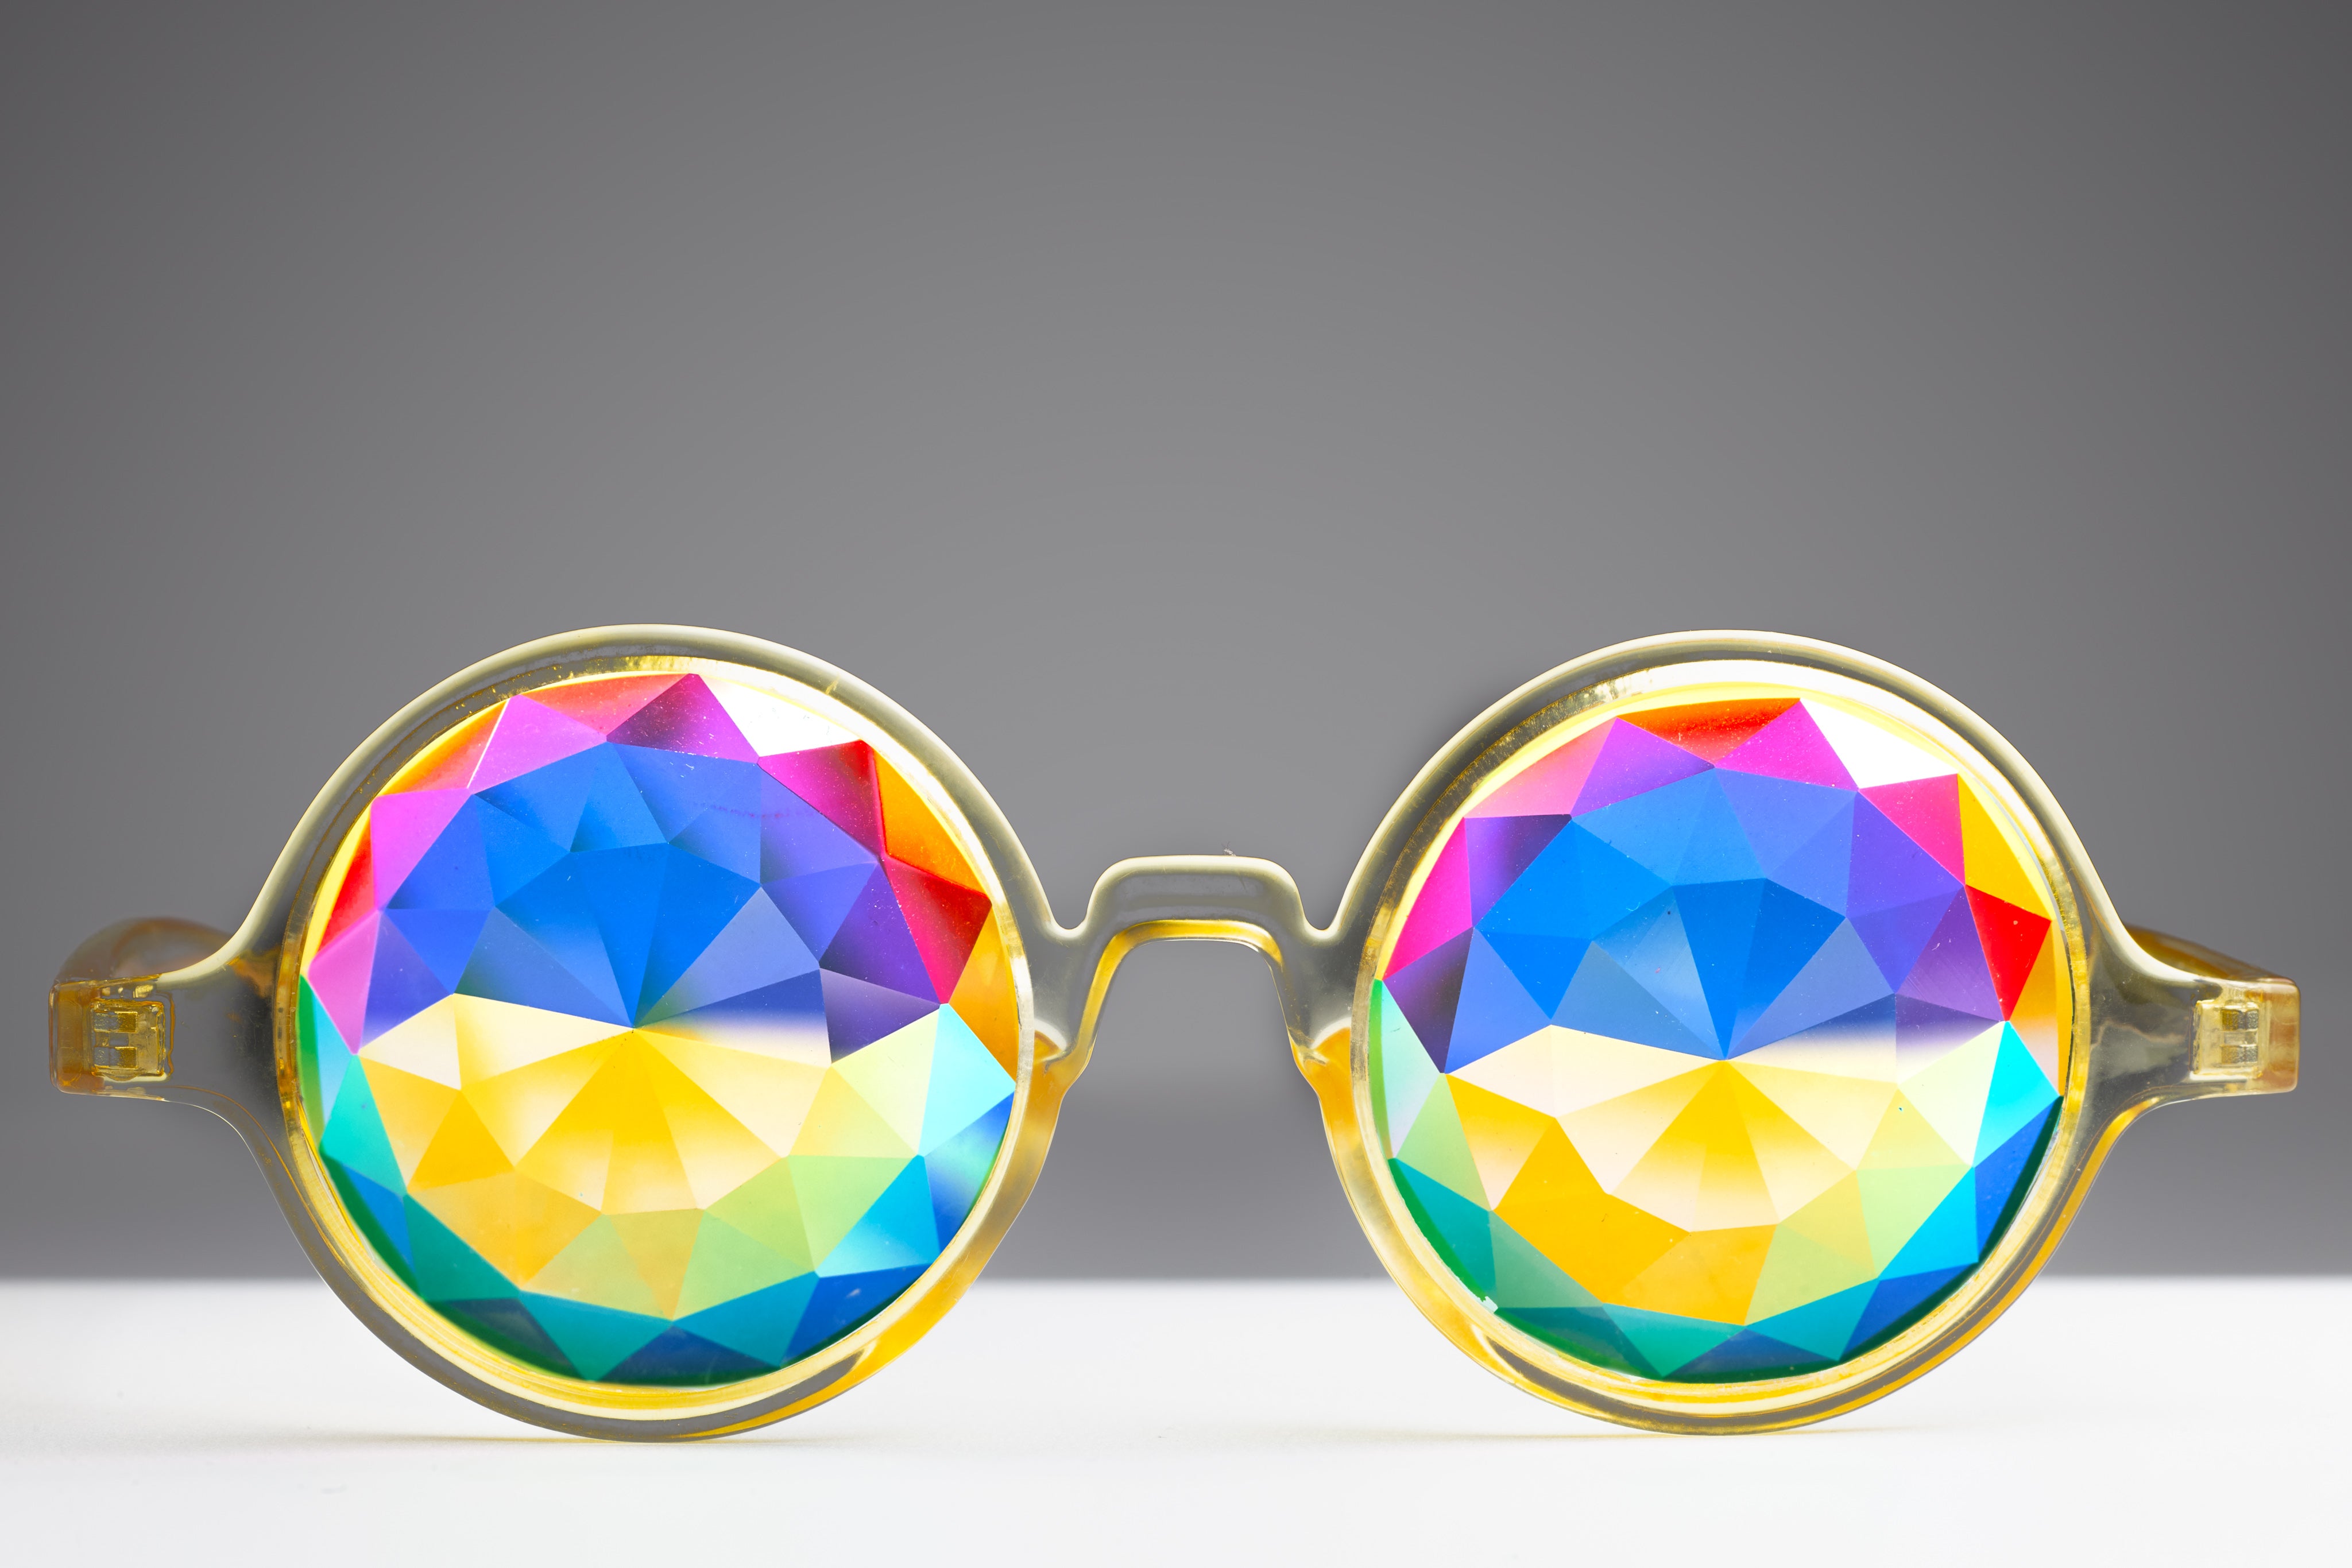 Intense Diamond Kaleidoscope Effect rainbow crystal lens Sunglasses Women Men Party Festival Bug Eye Portal Transparent Yellow Glasses at SuperFried's Festival Accessories and Sunglasses Online store